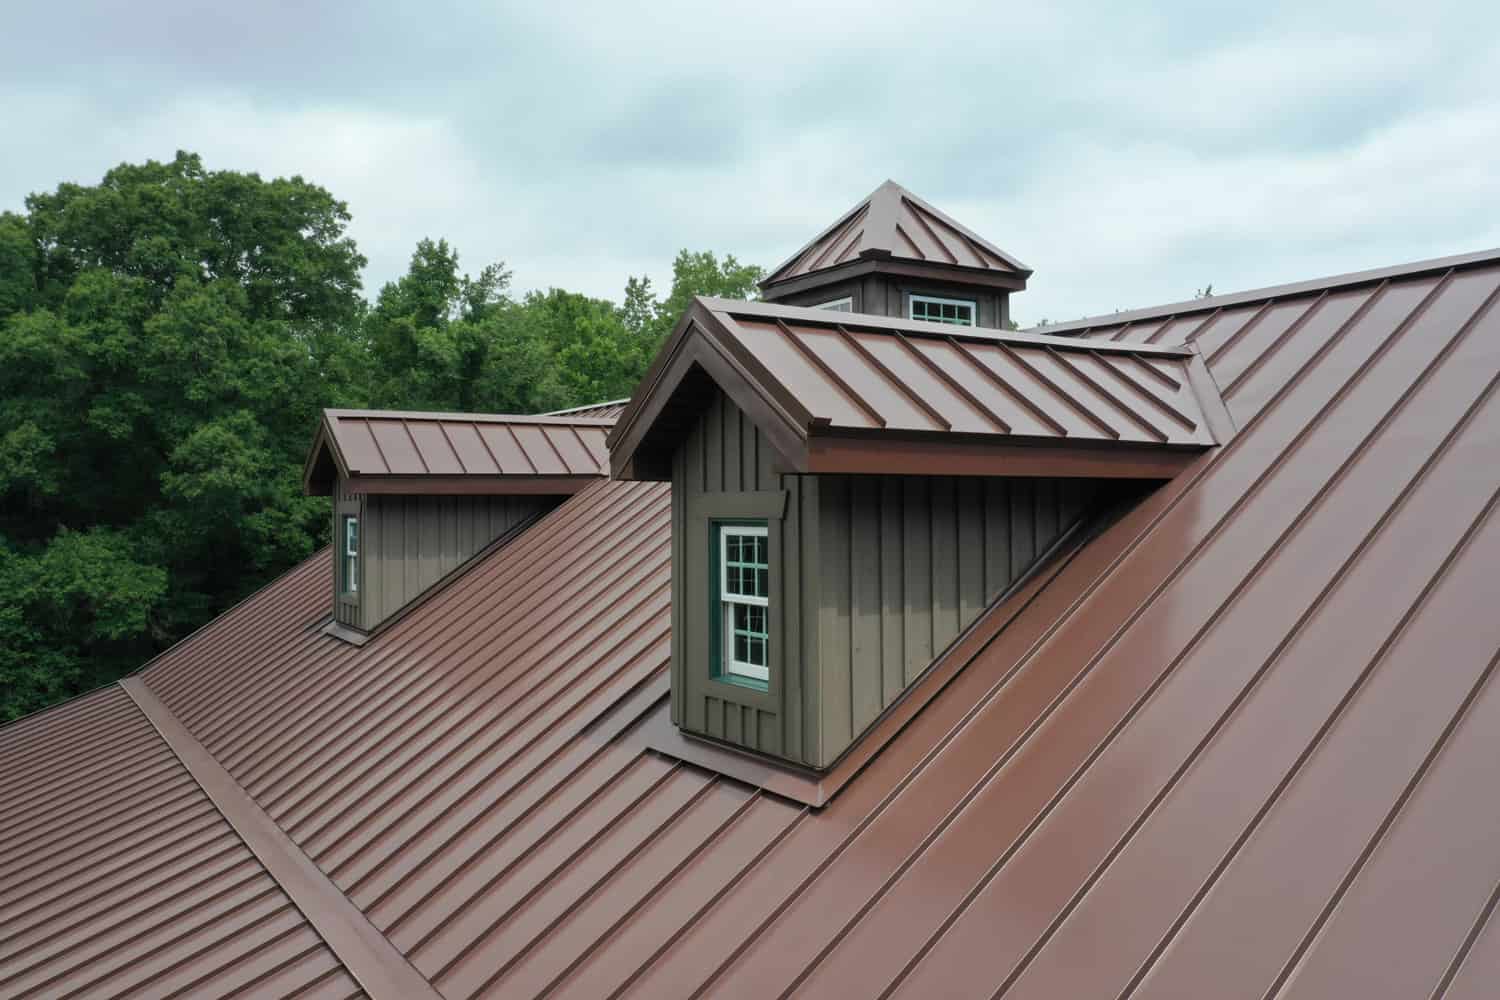 This is one amazing metal roof.